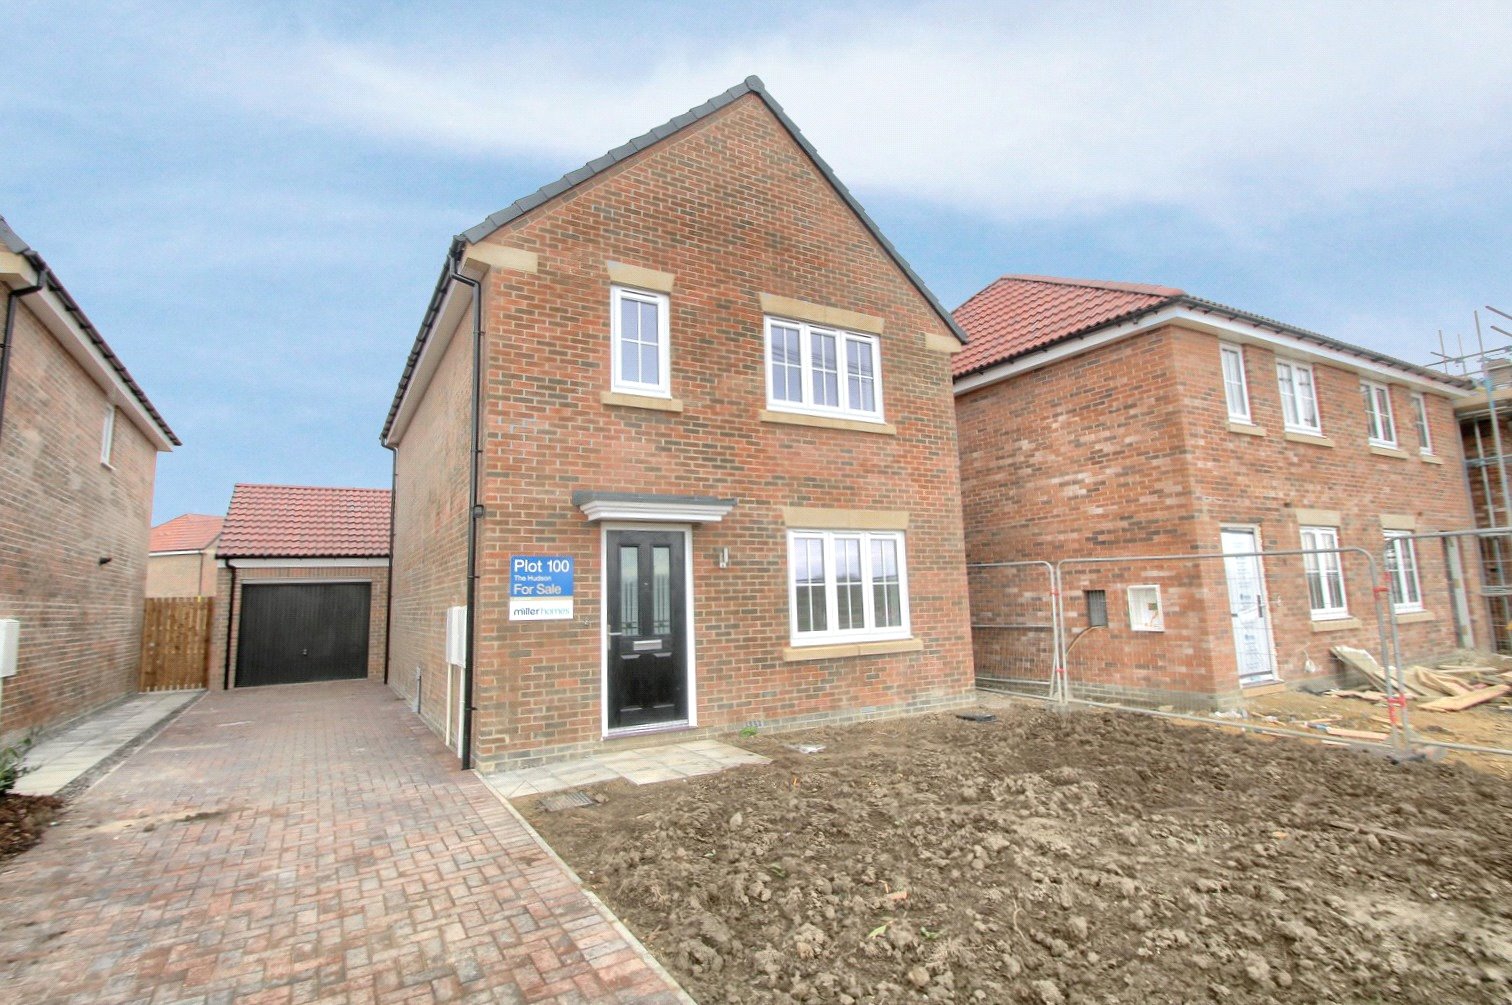 3 bed house for sale in Pearwood Gardens, Eaglescliffe - Property Image 1